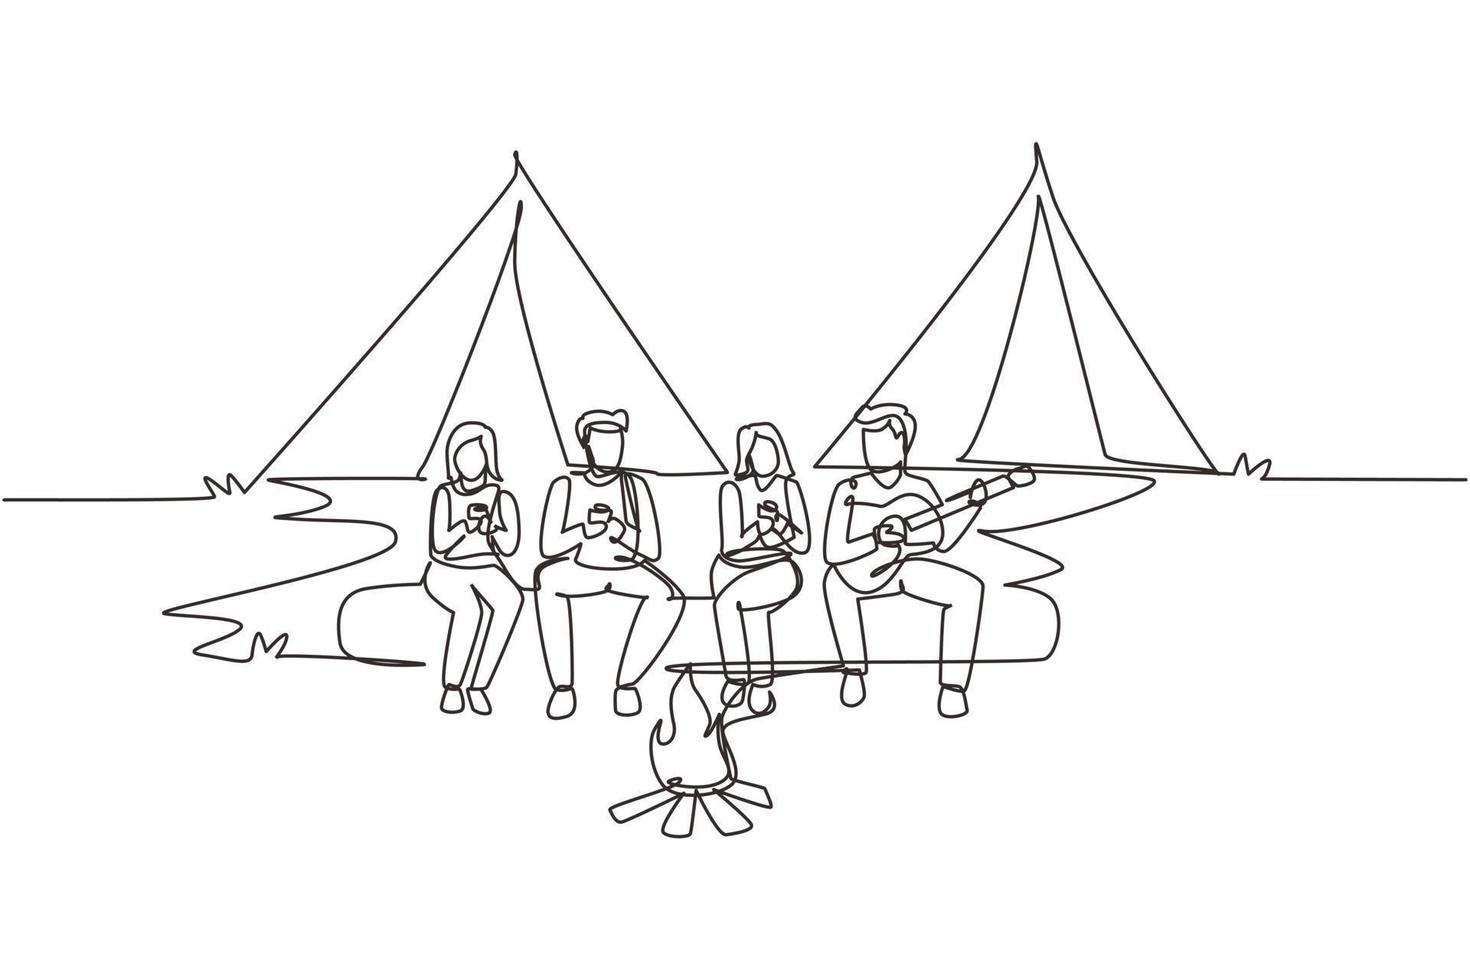 Single one line drawing two couple hikers sitting on log of wood near campfire in forest. People drinking hot tea and man playing guitar. Camping gear and backpack. Continuous line draw design vector